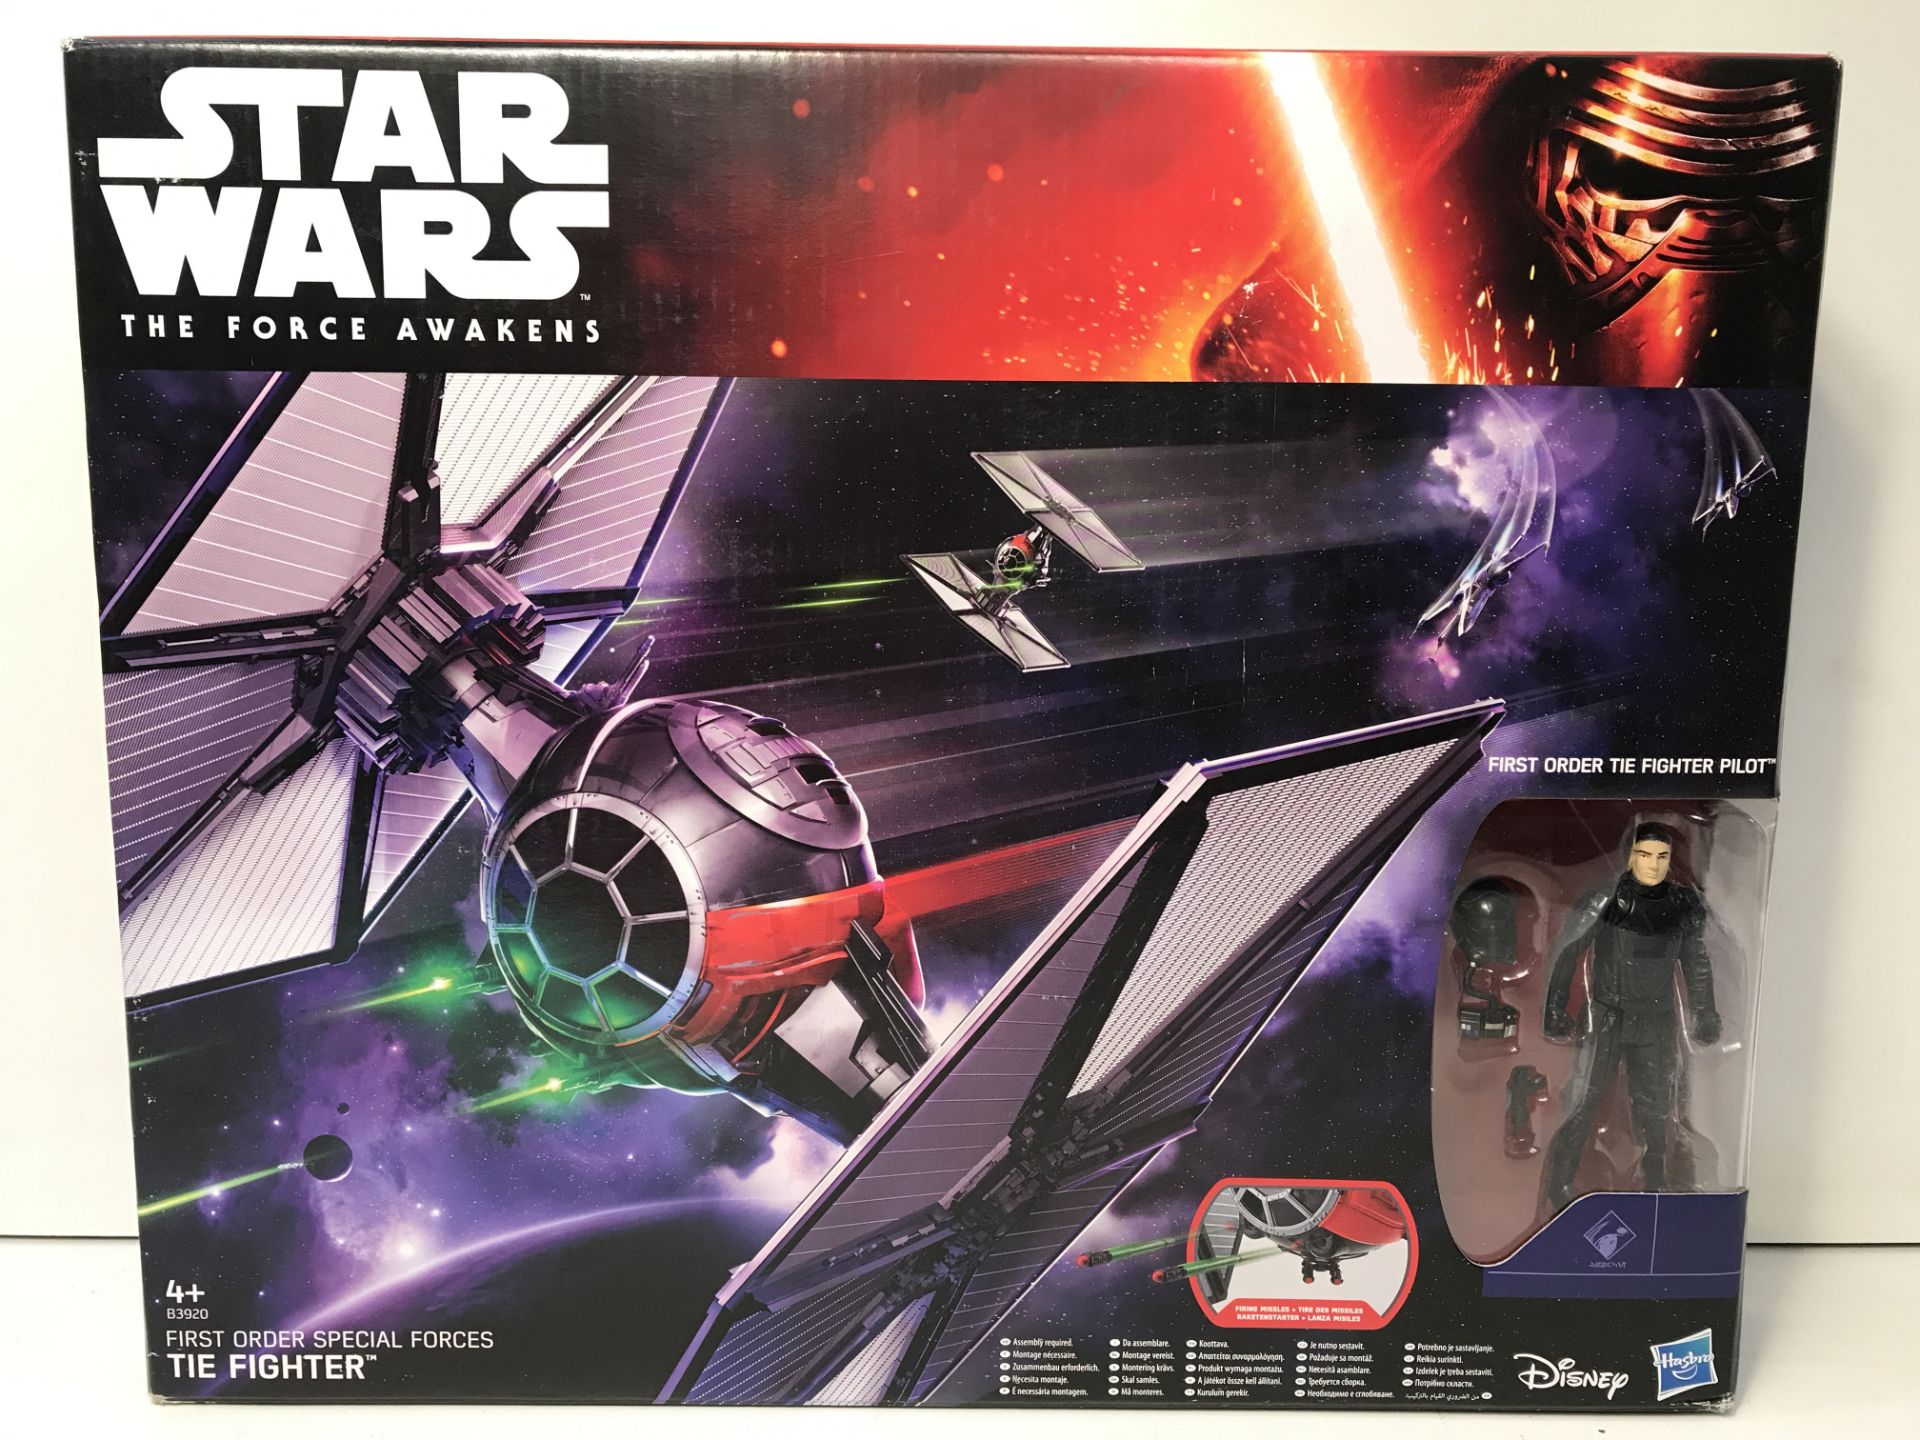 1 x Star Wars - B3920 - Force Awakens Tie Fighter Toy with First Order Pilot 3.75 Inch Action Figure - Image 3 of 6